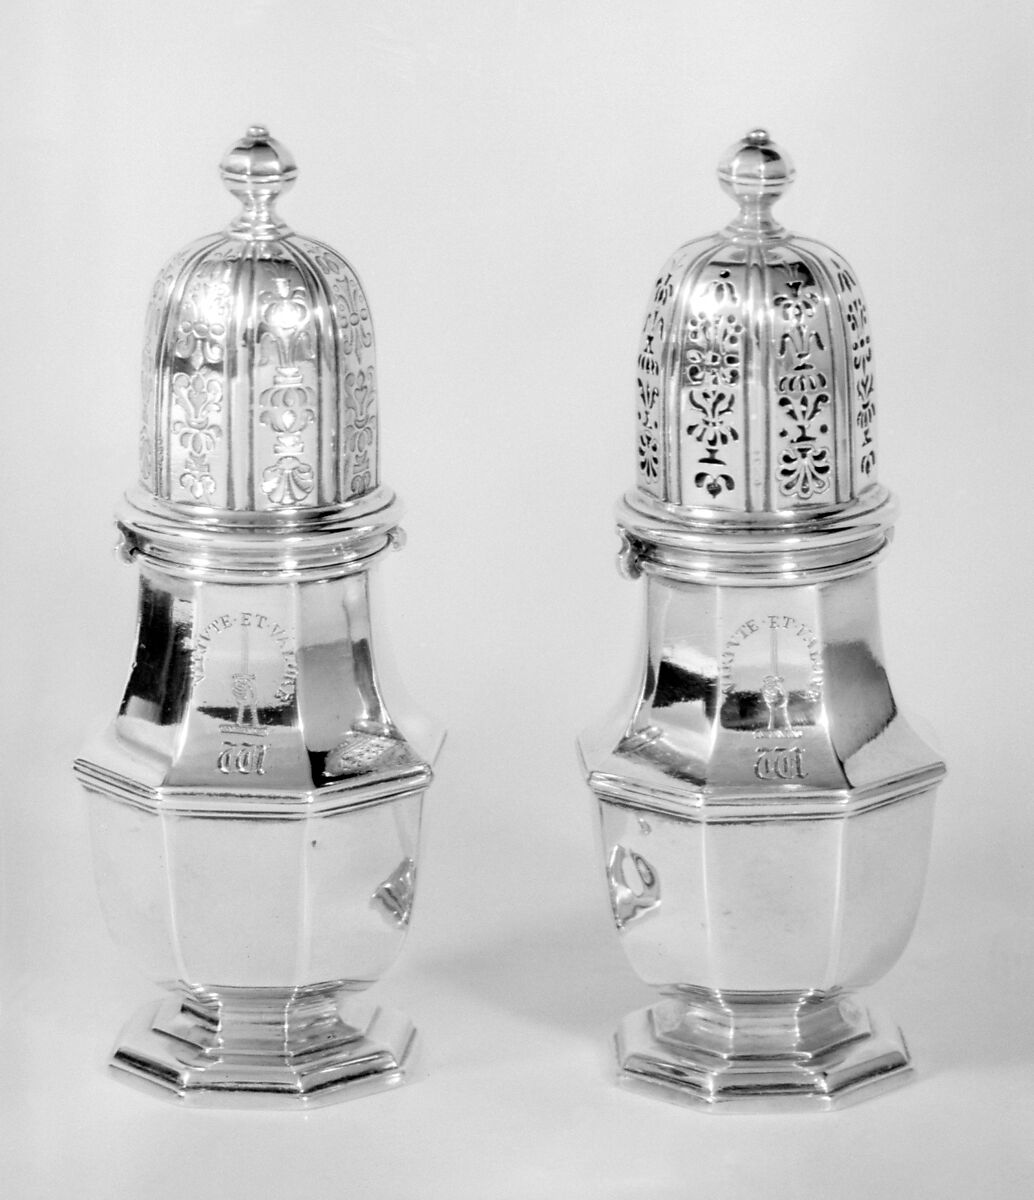 Pair of casters, John Chartier (active 1697–1715), Silver, British, London 